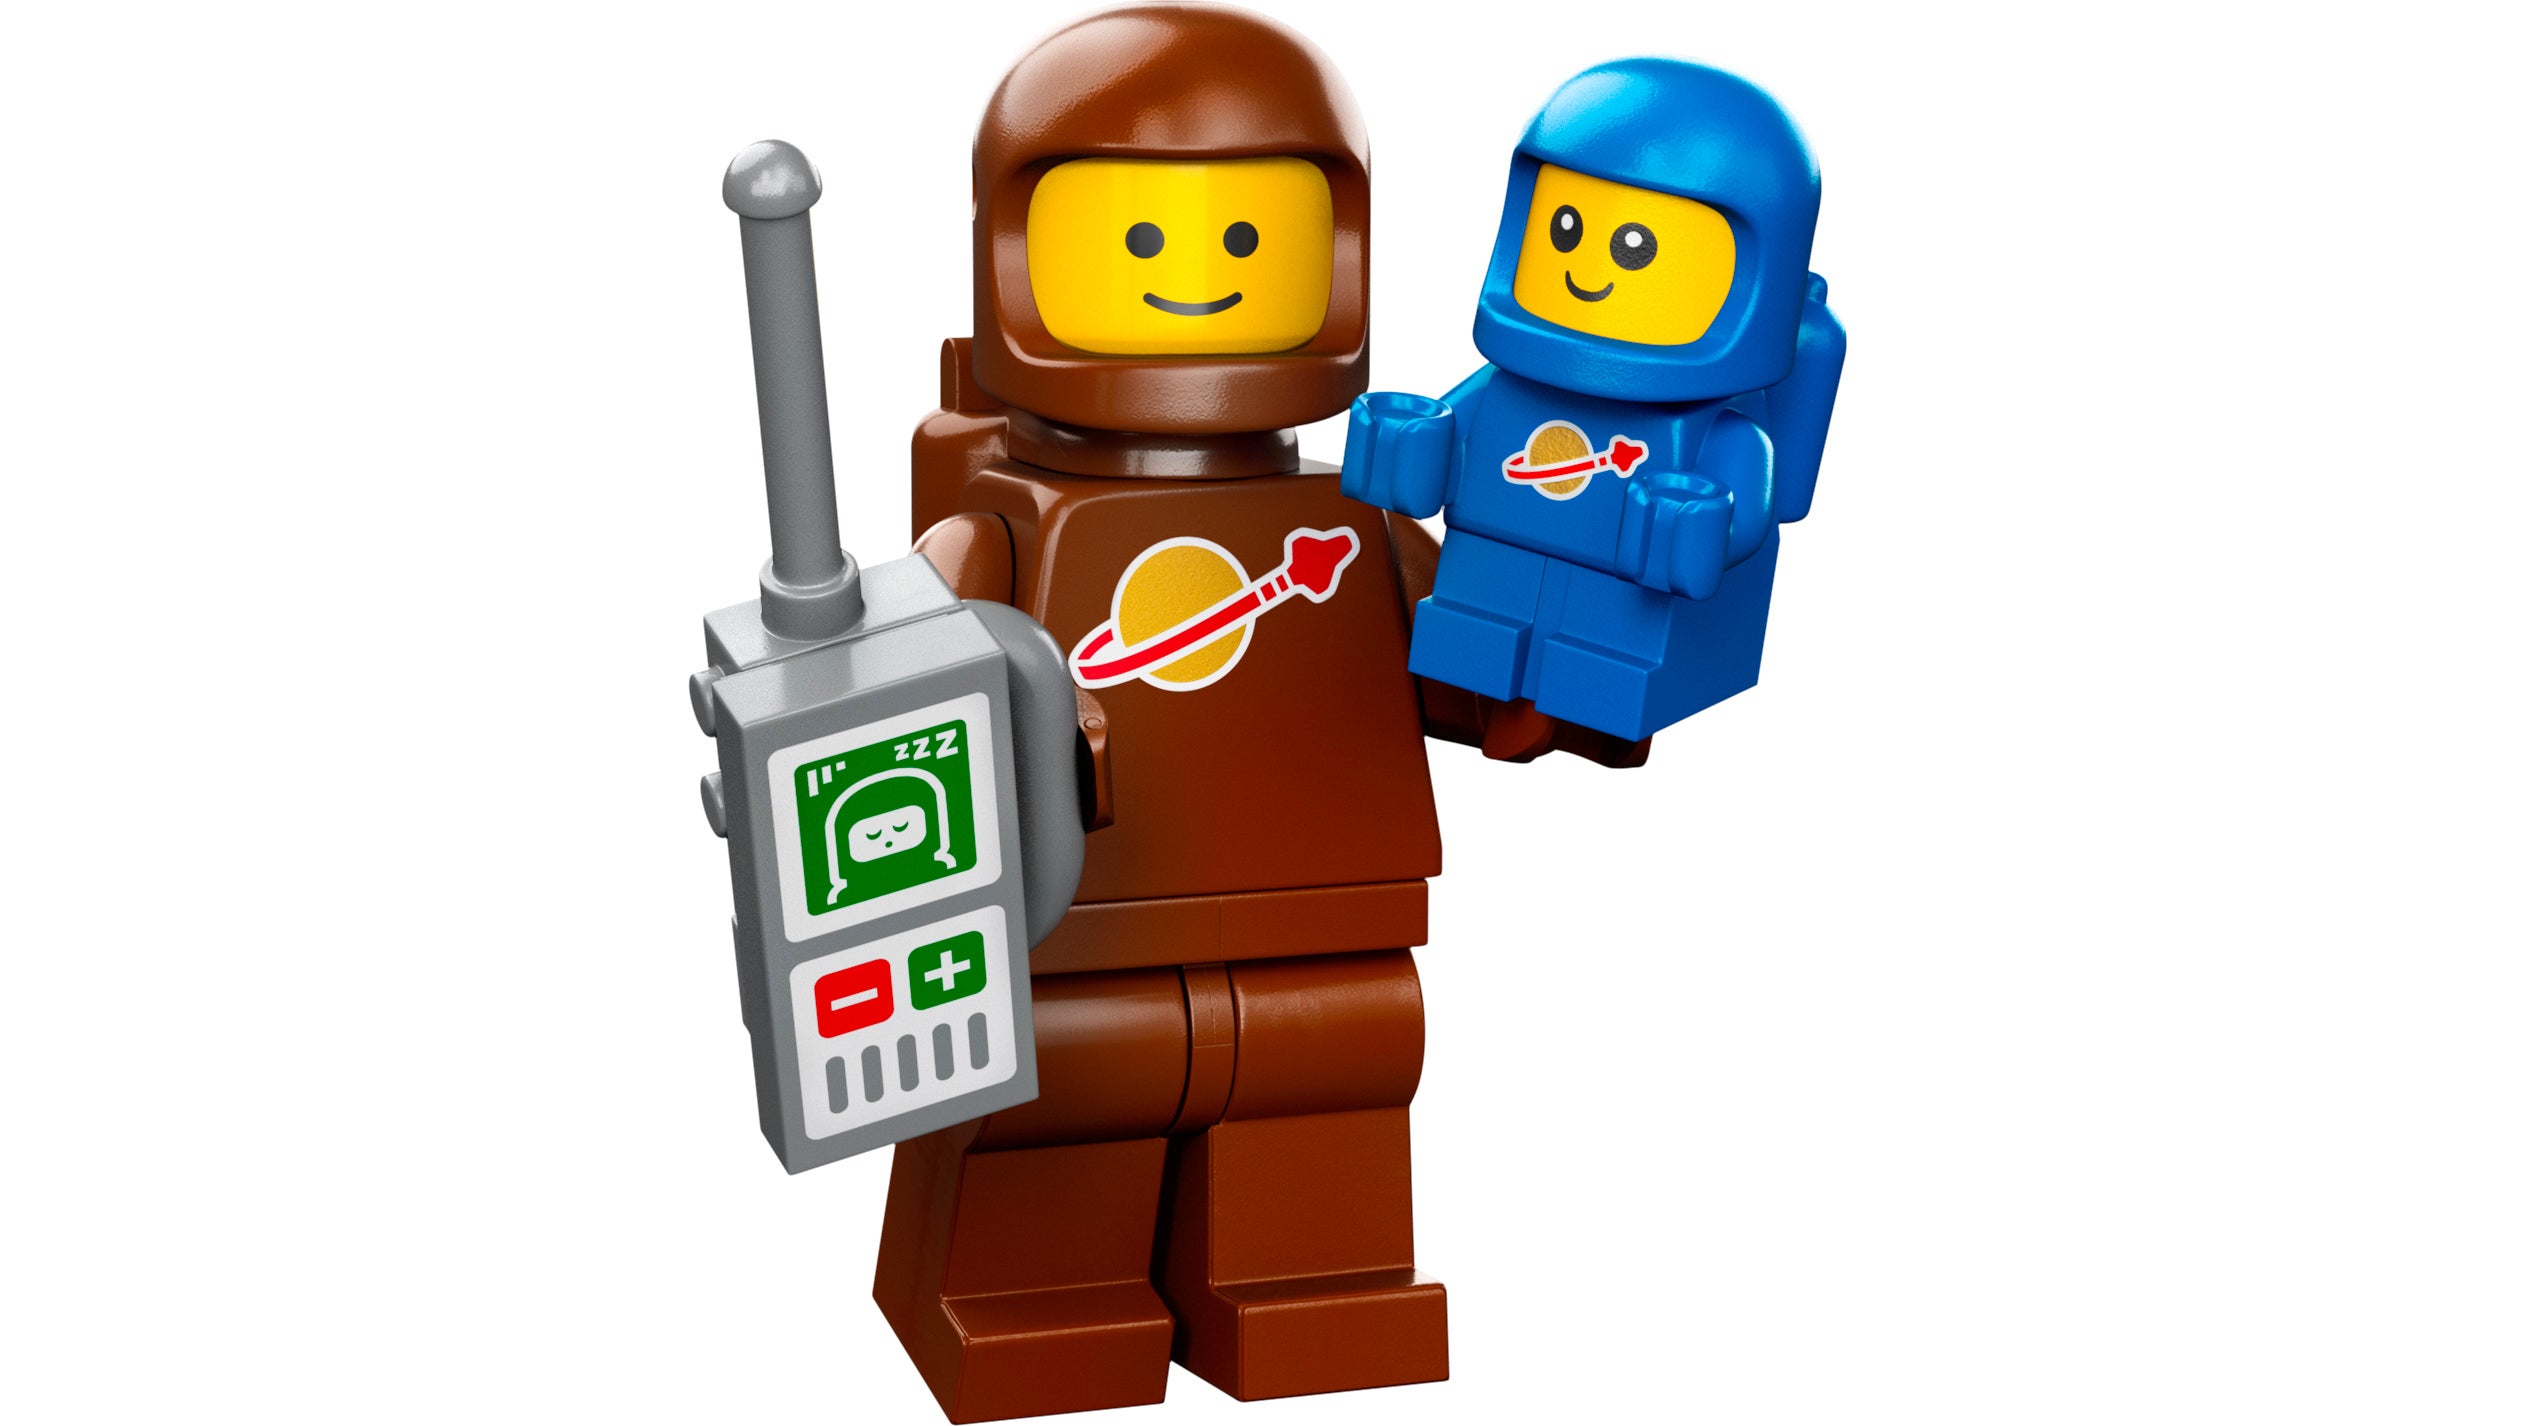 No one tell Lego what they could really be charging for its new Brown Astronaut and Spacebaby minifigures. (Image: Lego)